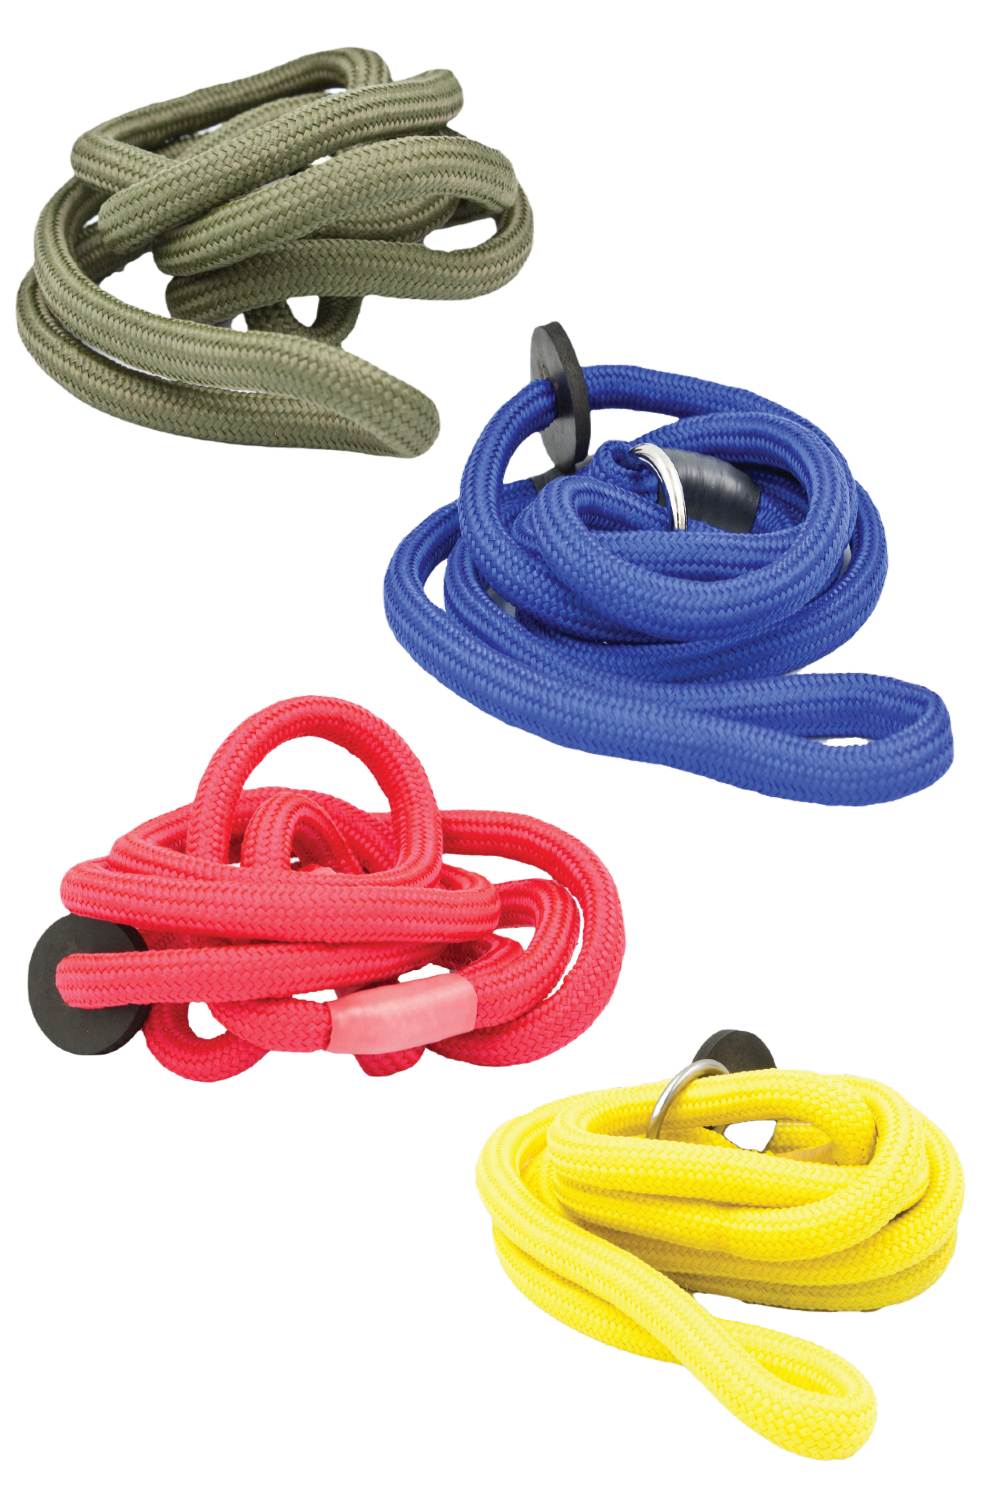 Bisley Compact Leads In Olive, Blue, Red, Yellow